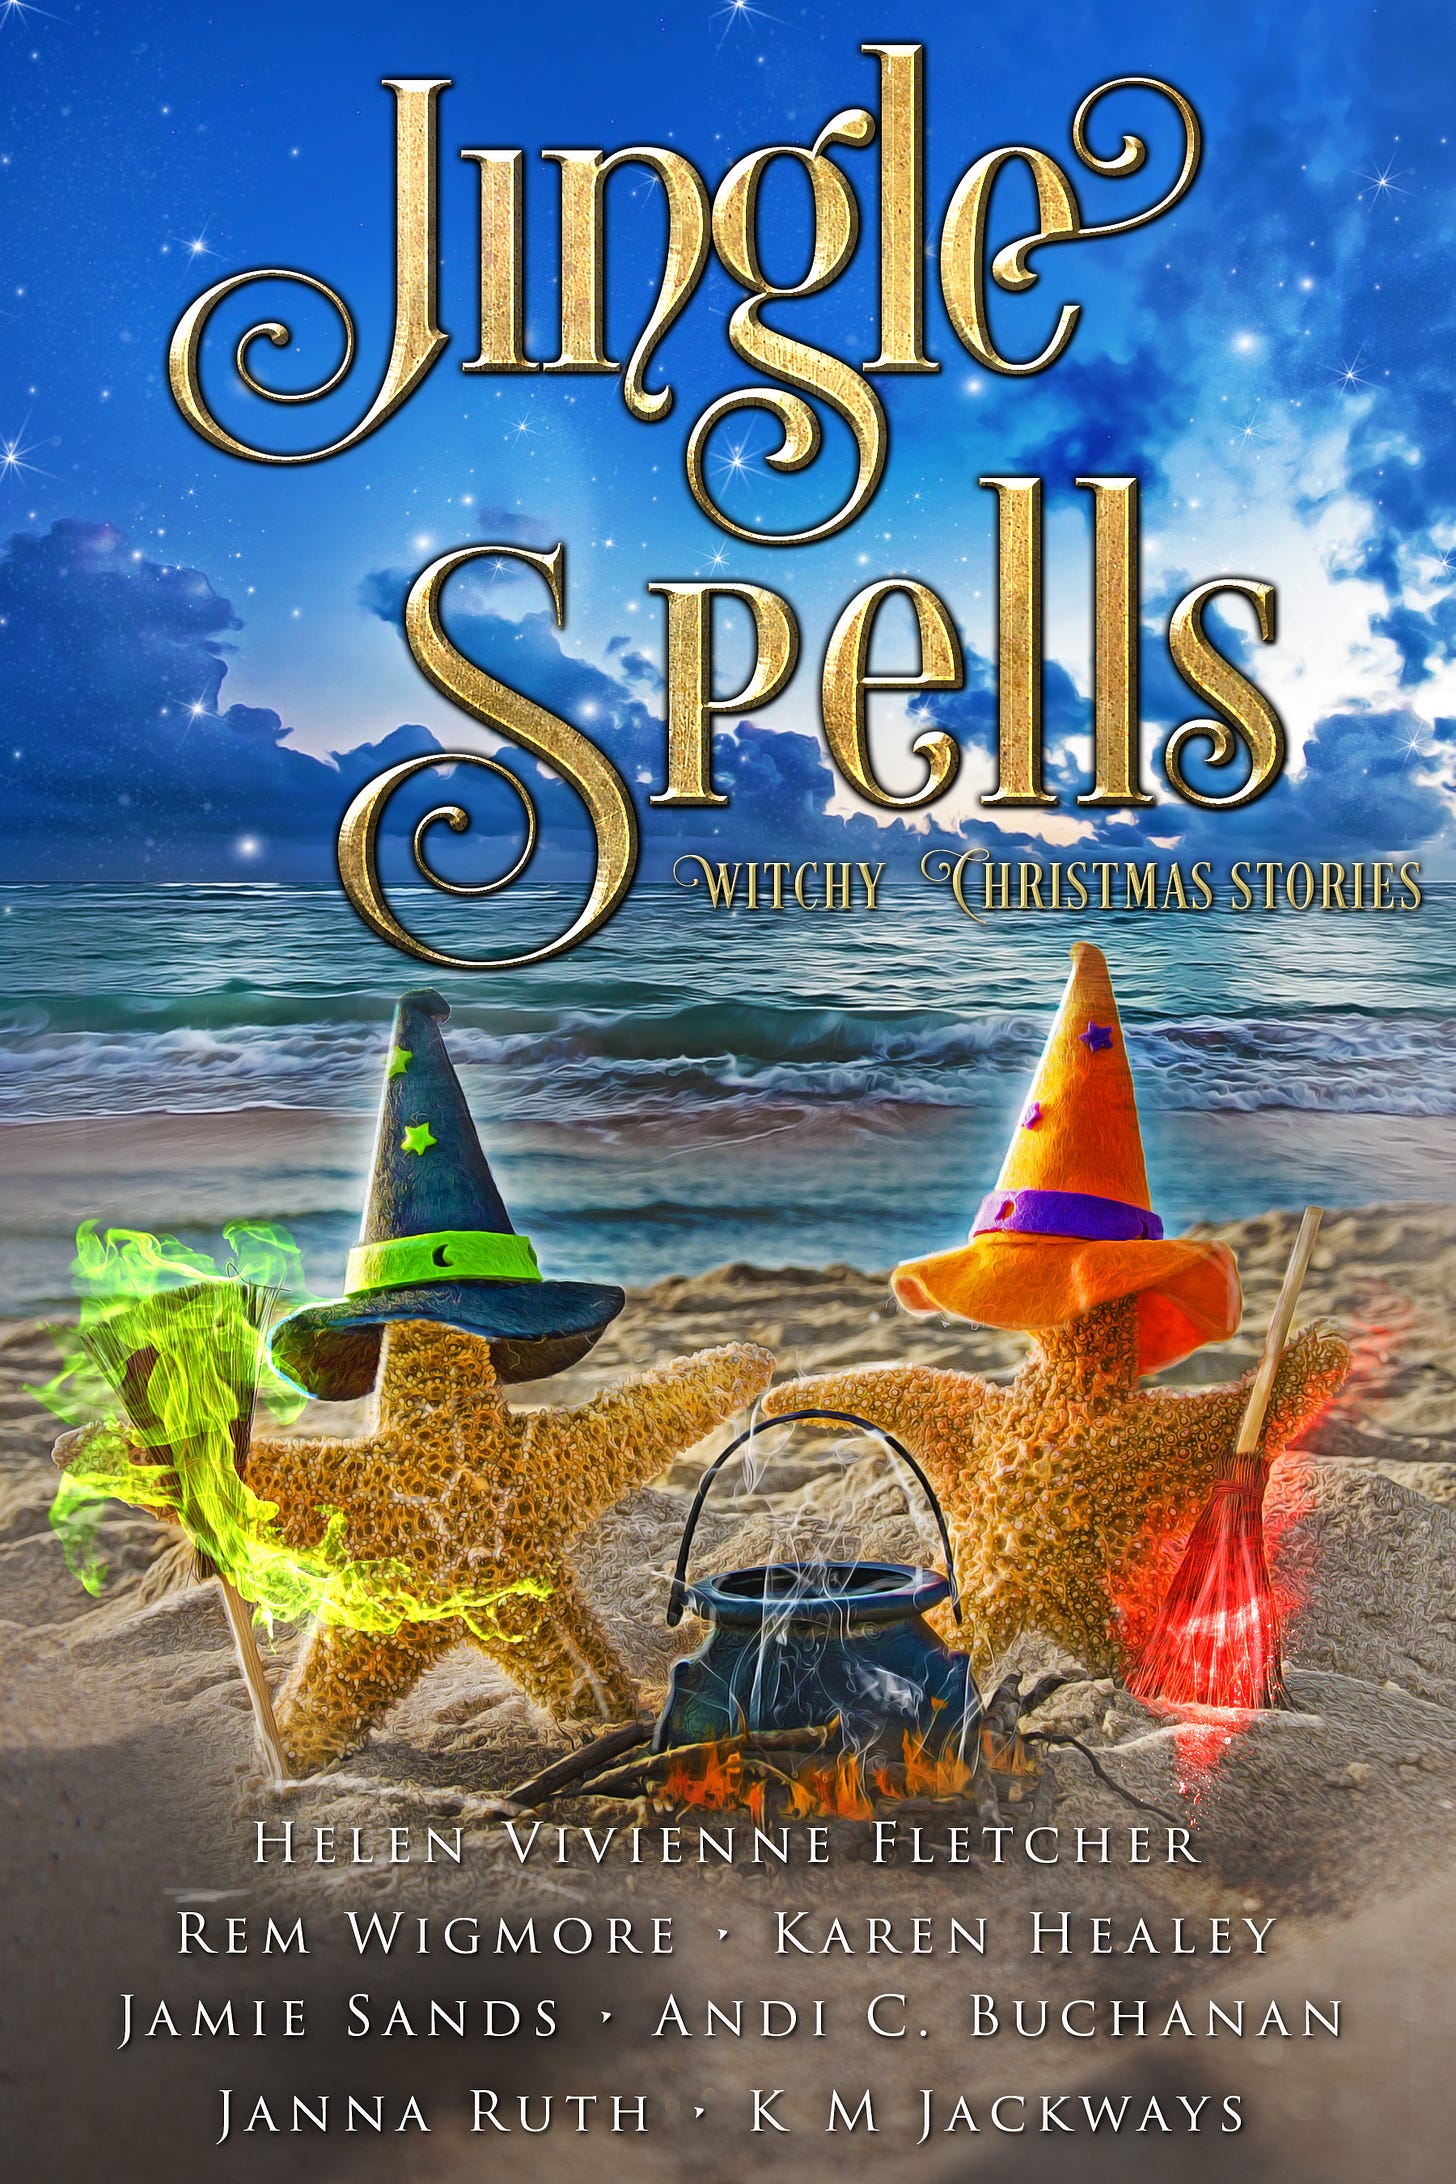 Cover of Jingle Spells - a beach scene with two starfish dressed up as witches with a cauldron